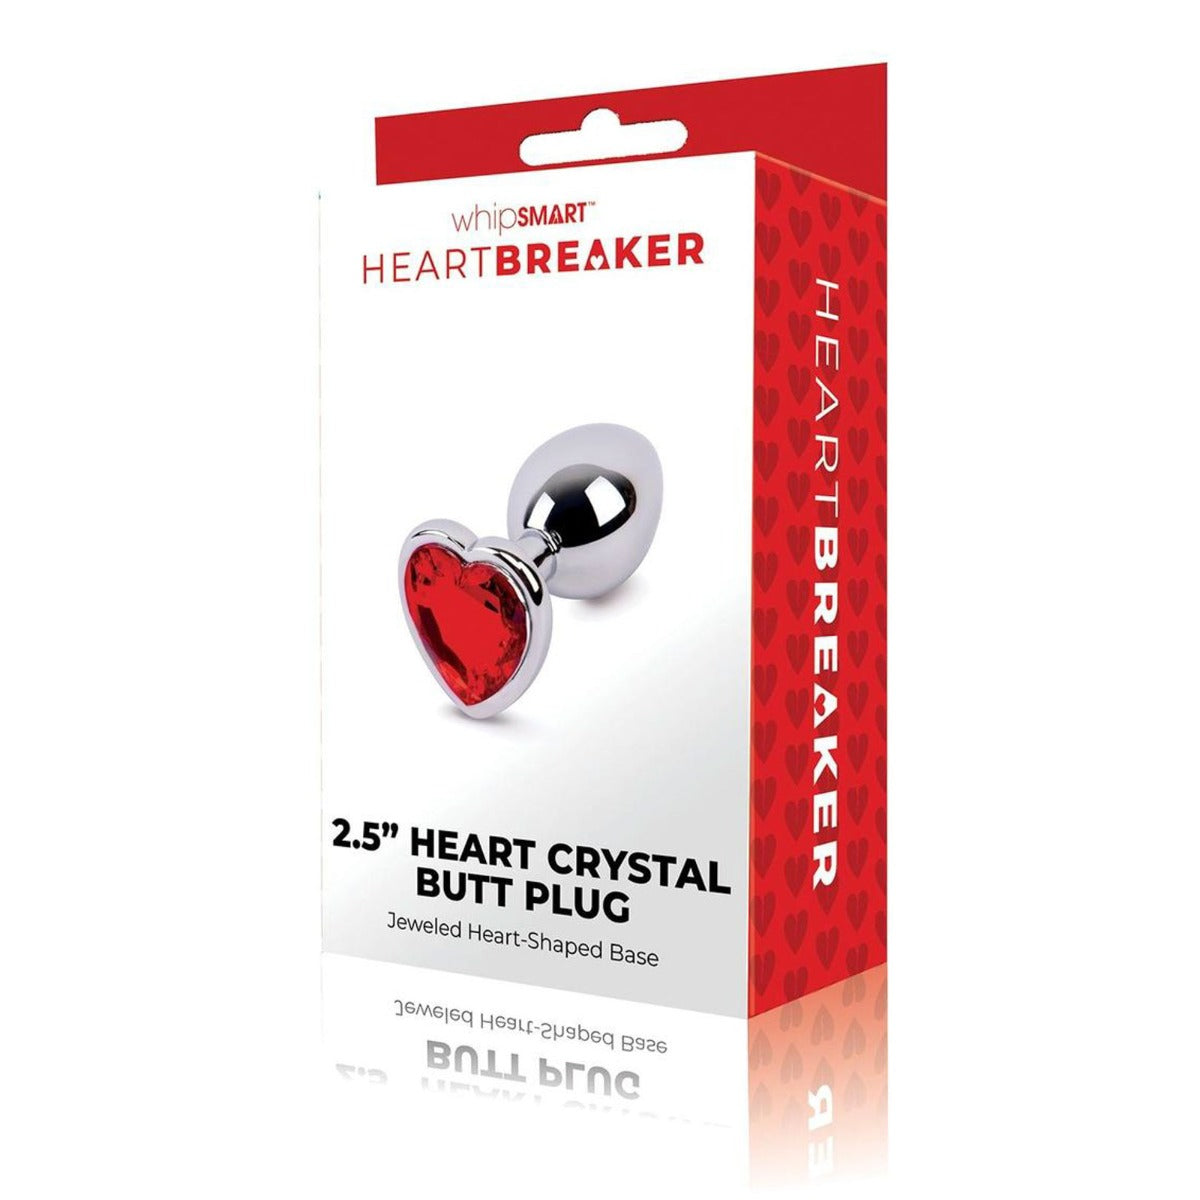 WhipSMART | HEARTBREAKER METAL BUTT PLUG - 2.5 Inches